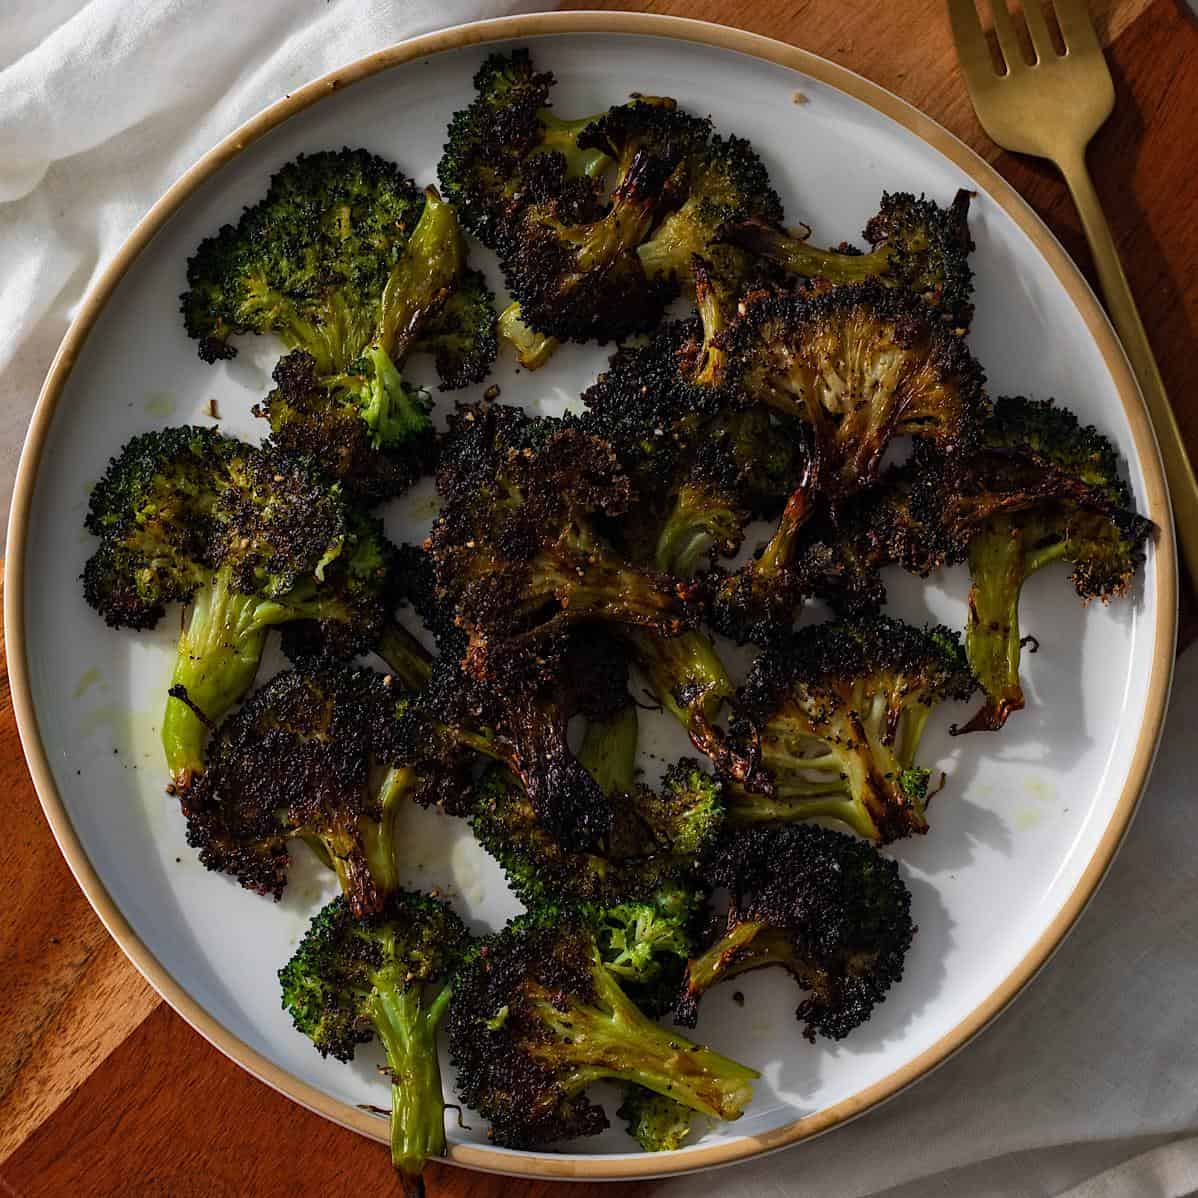  Roasted broccoli never looked so good!